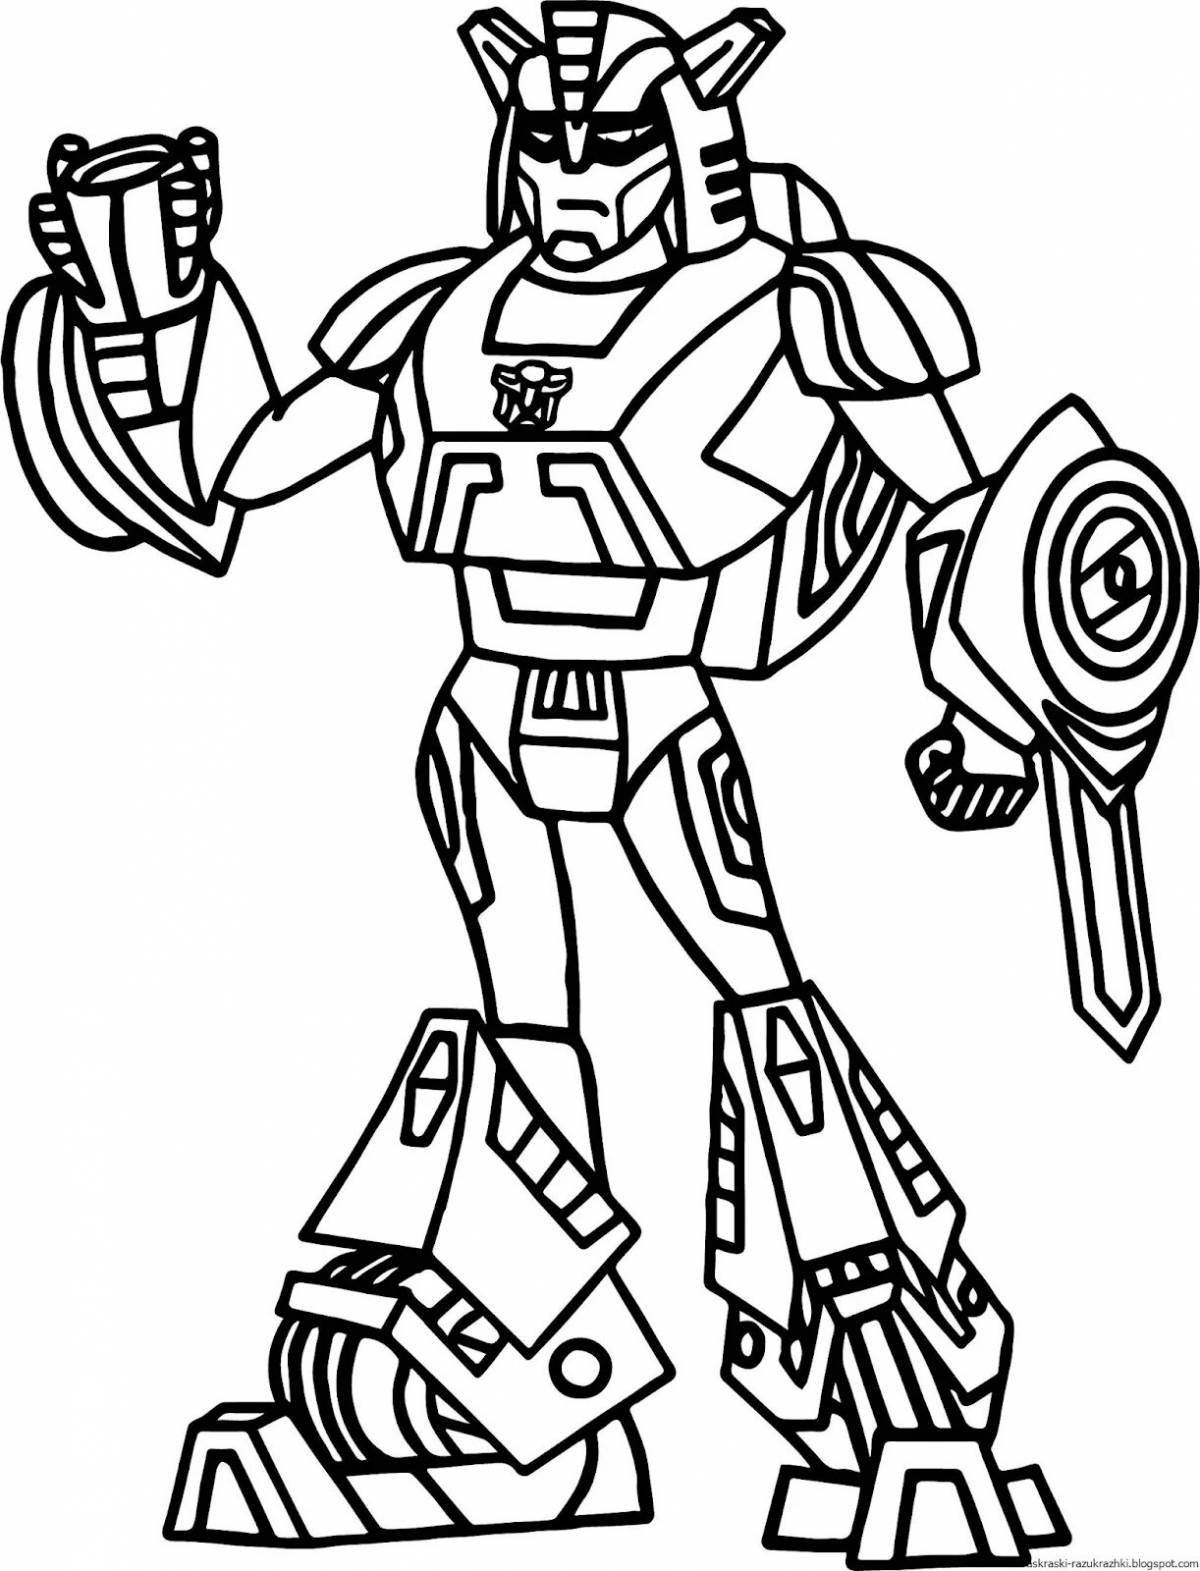 Vibrant bumblebee robot coloring page for kids